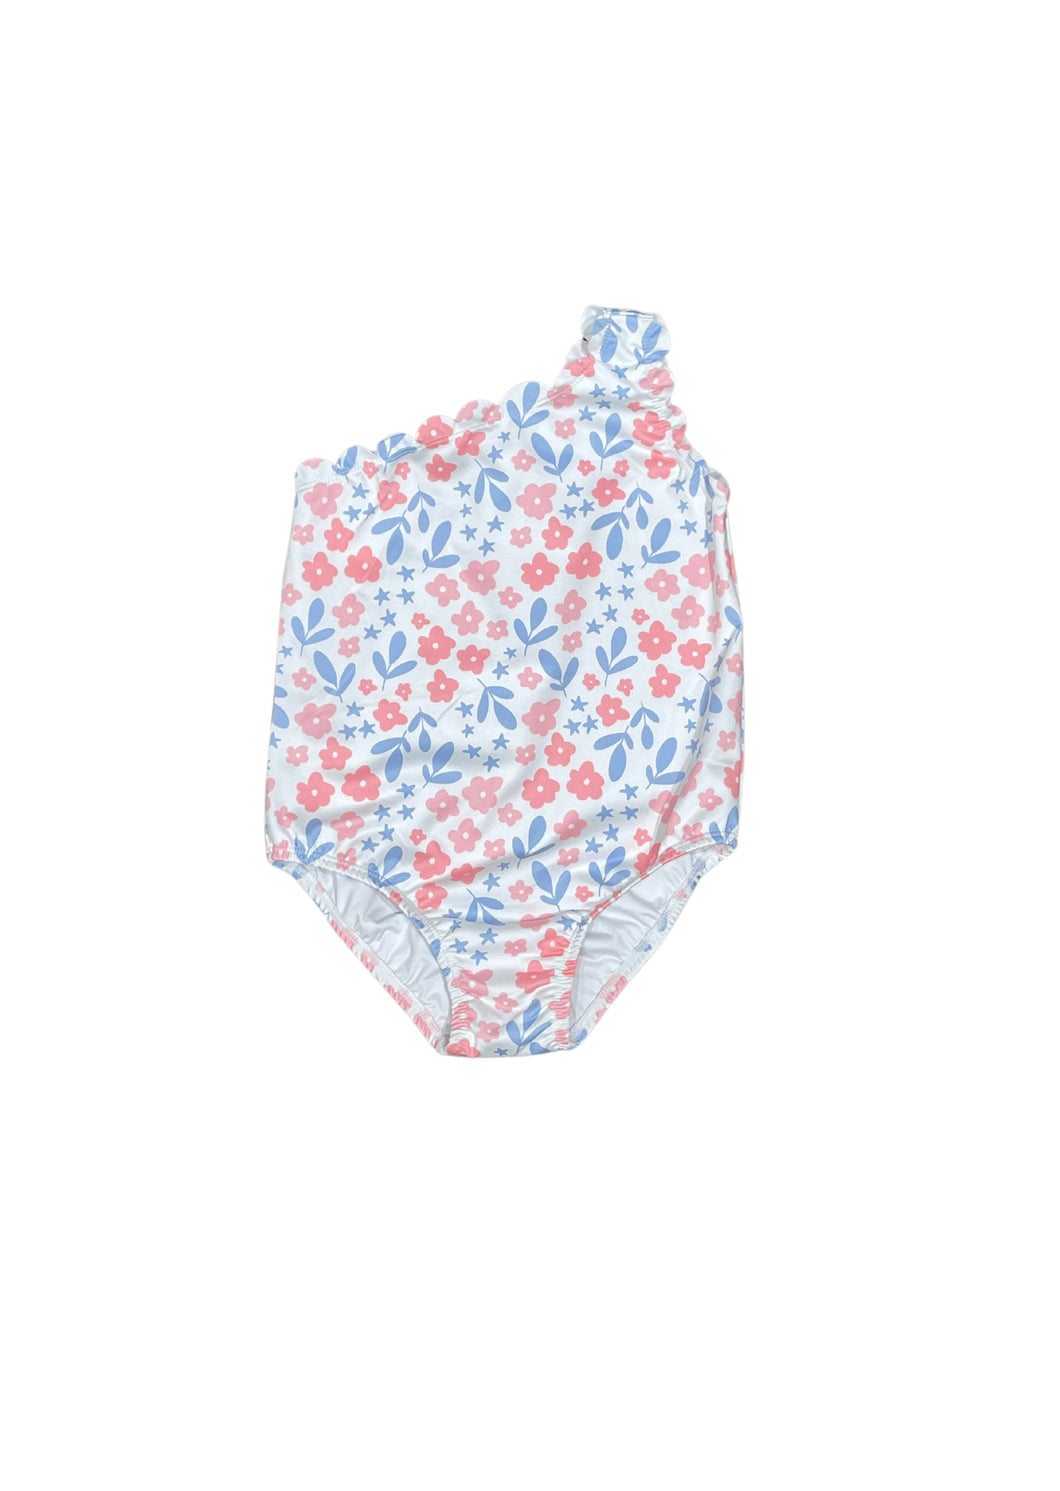 One-Piece Scalloped Swimsuit - Pink & Lavender Floral